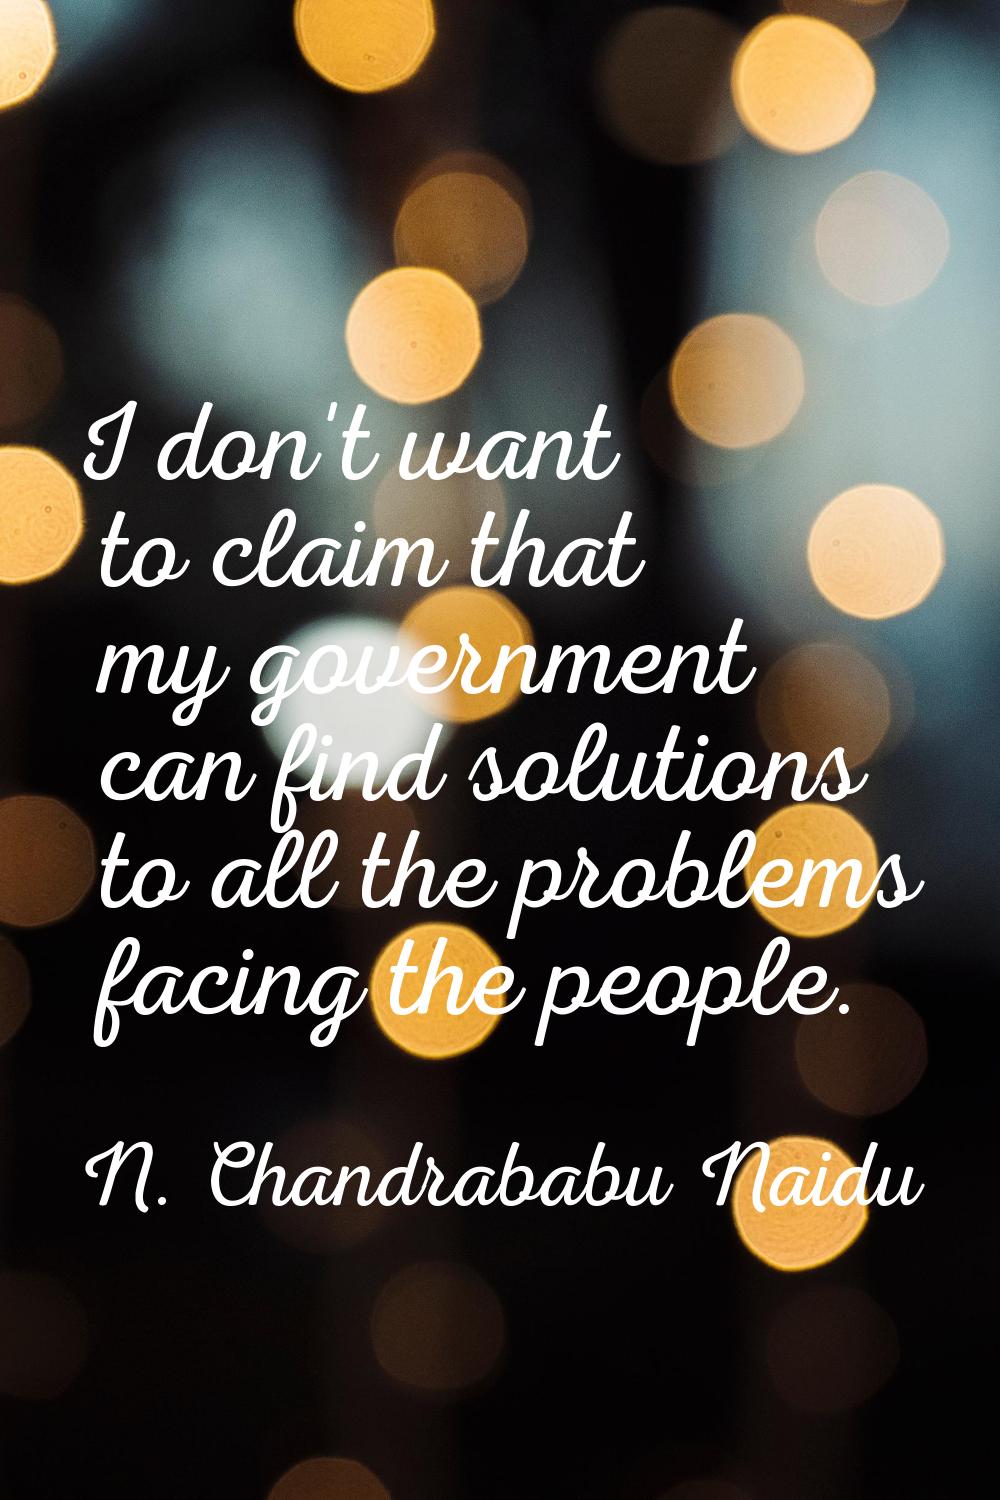 I don't want to claim that my government can find solutions to all the problems facing the people.